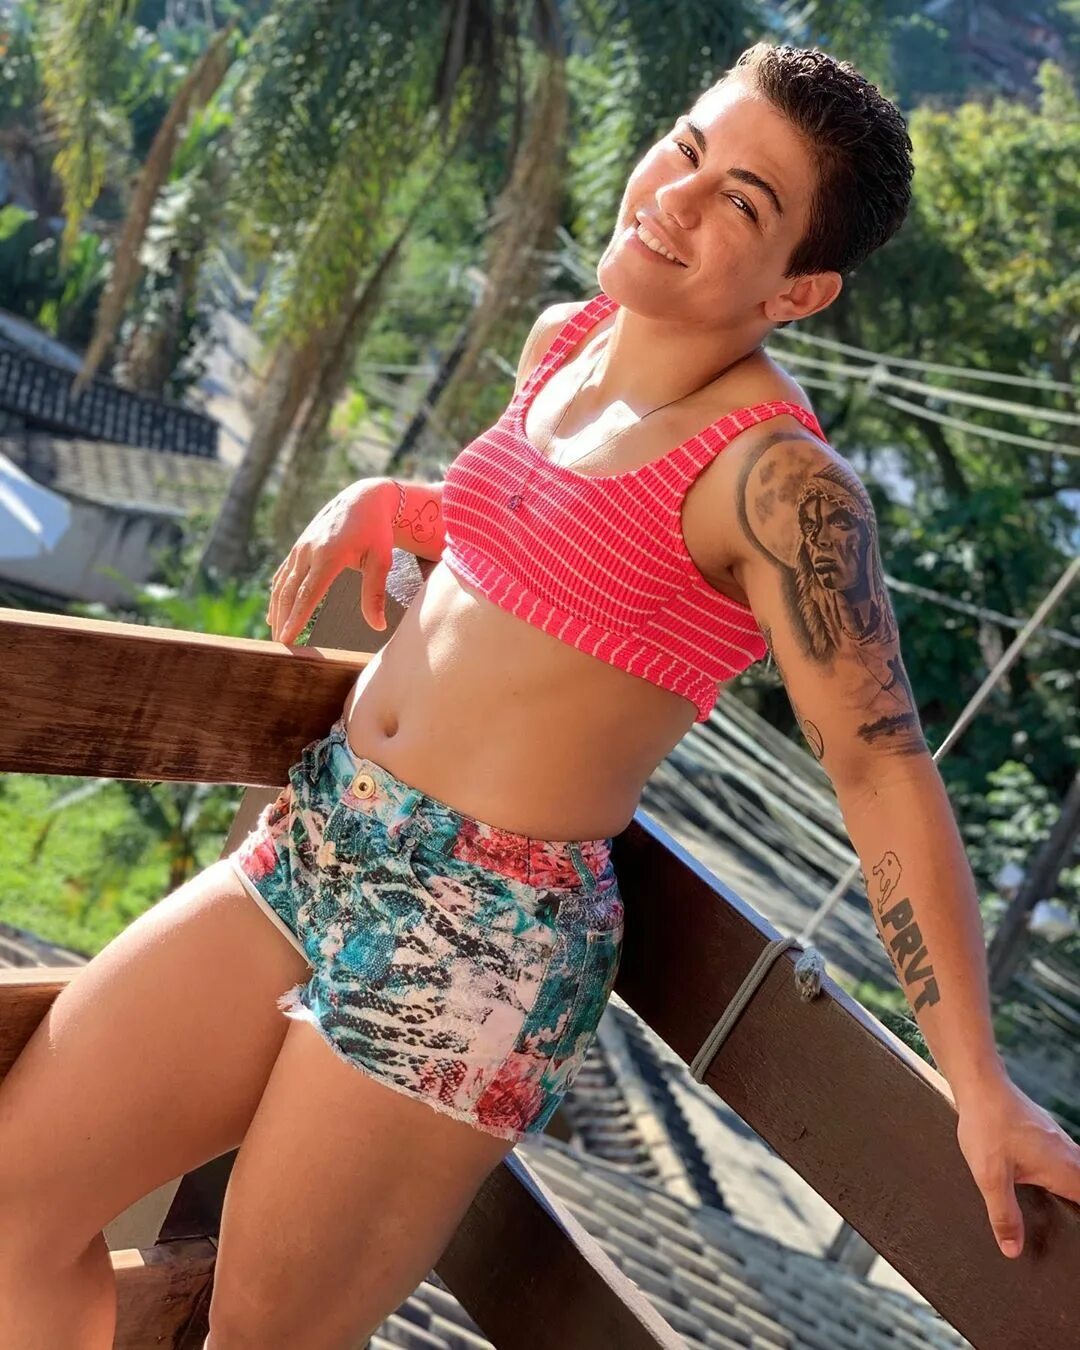 Fans only jessica andrade Jessica Andrade